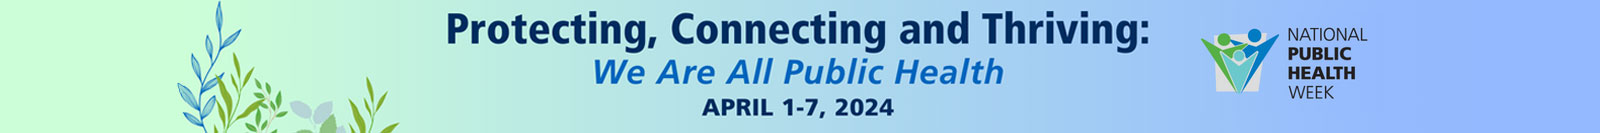 Protecting, Connecting and Thriving: We are all Public Health. National Public Health Week is April 1-7, 2024